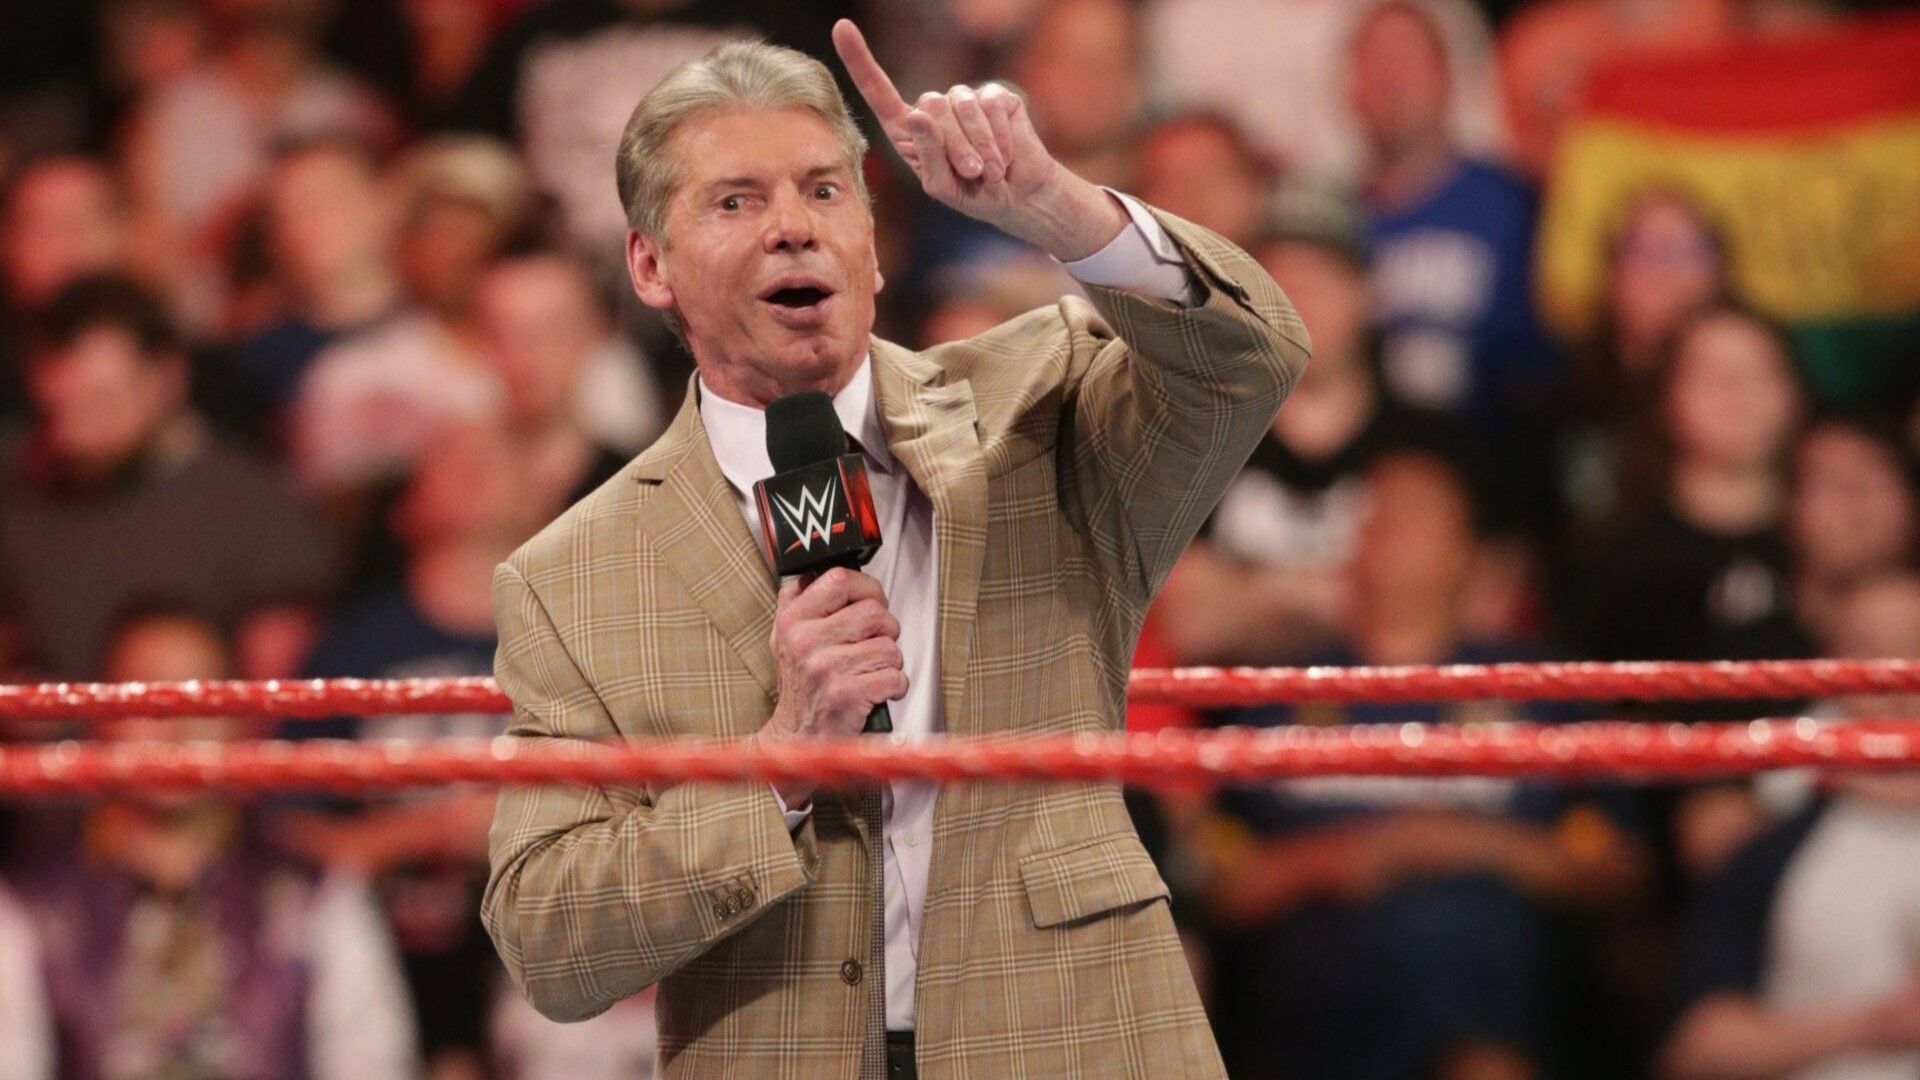 WWE co-founder Vince McMahon speaks to the fans on RAW